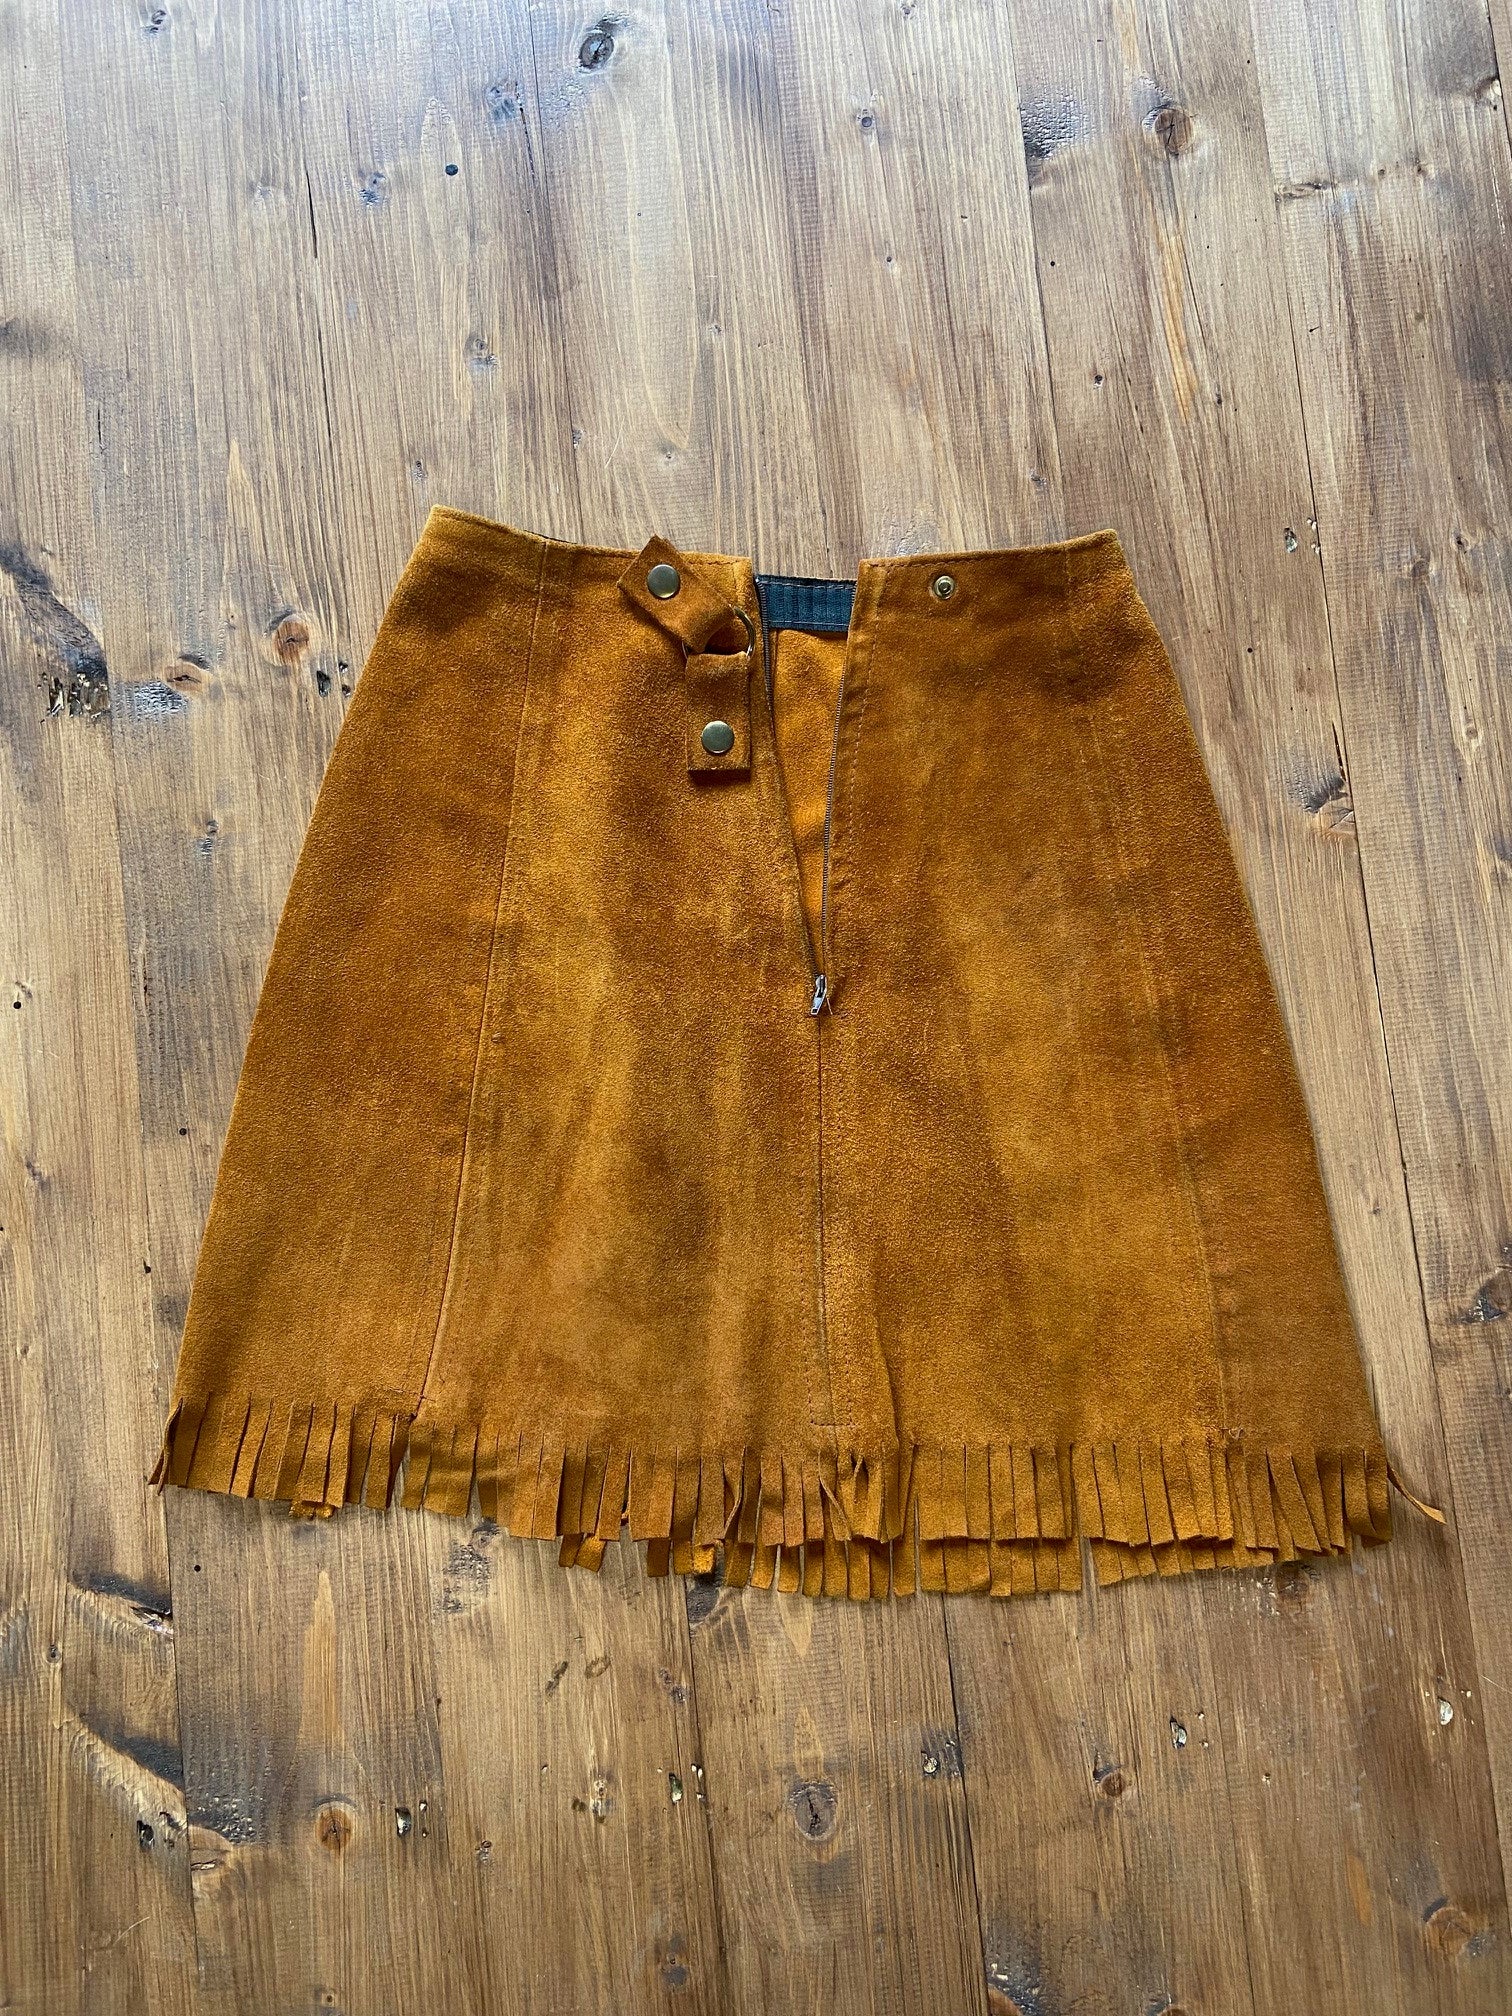 70s Suede Two piece